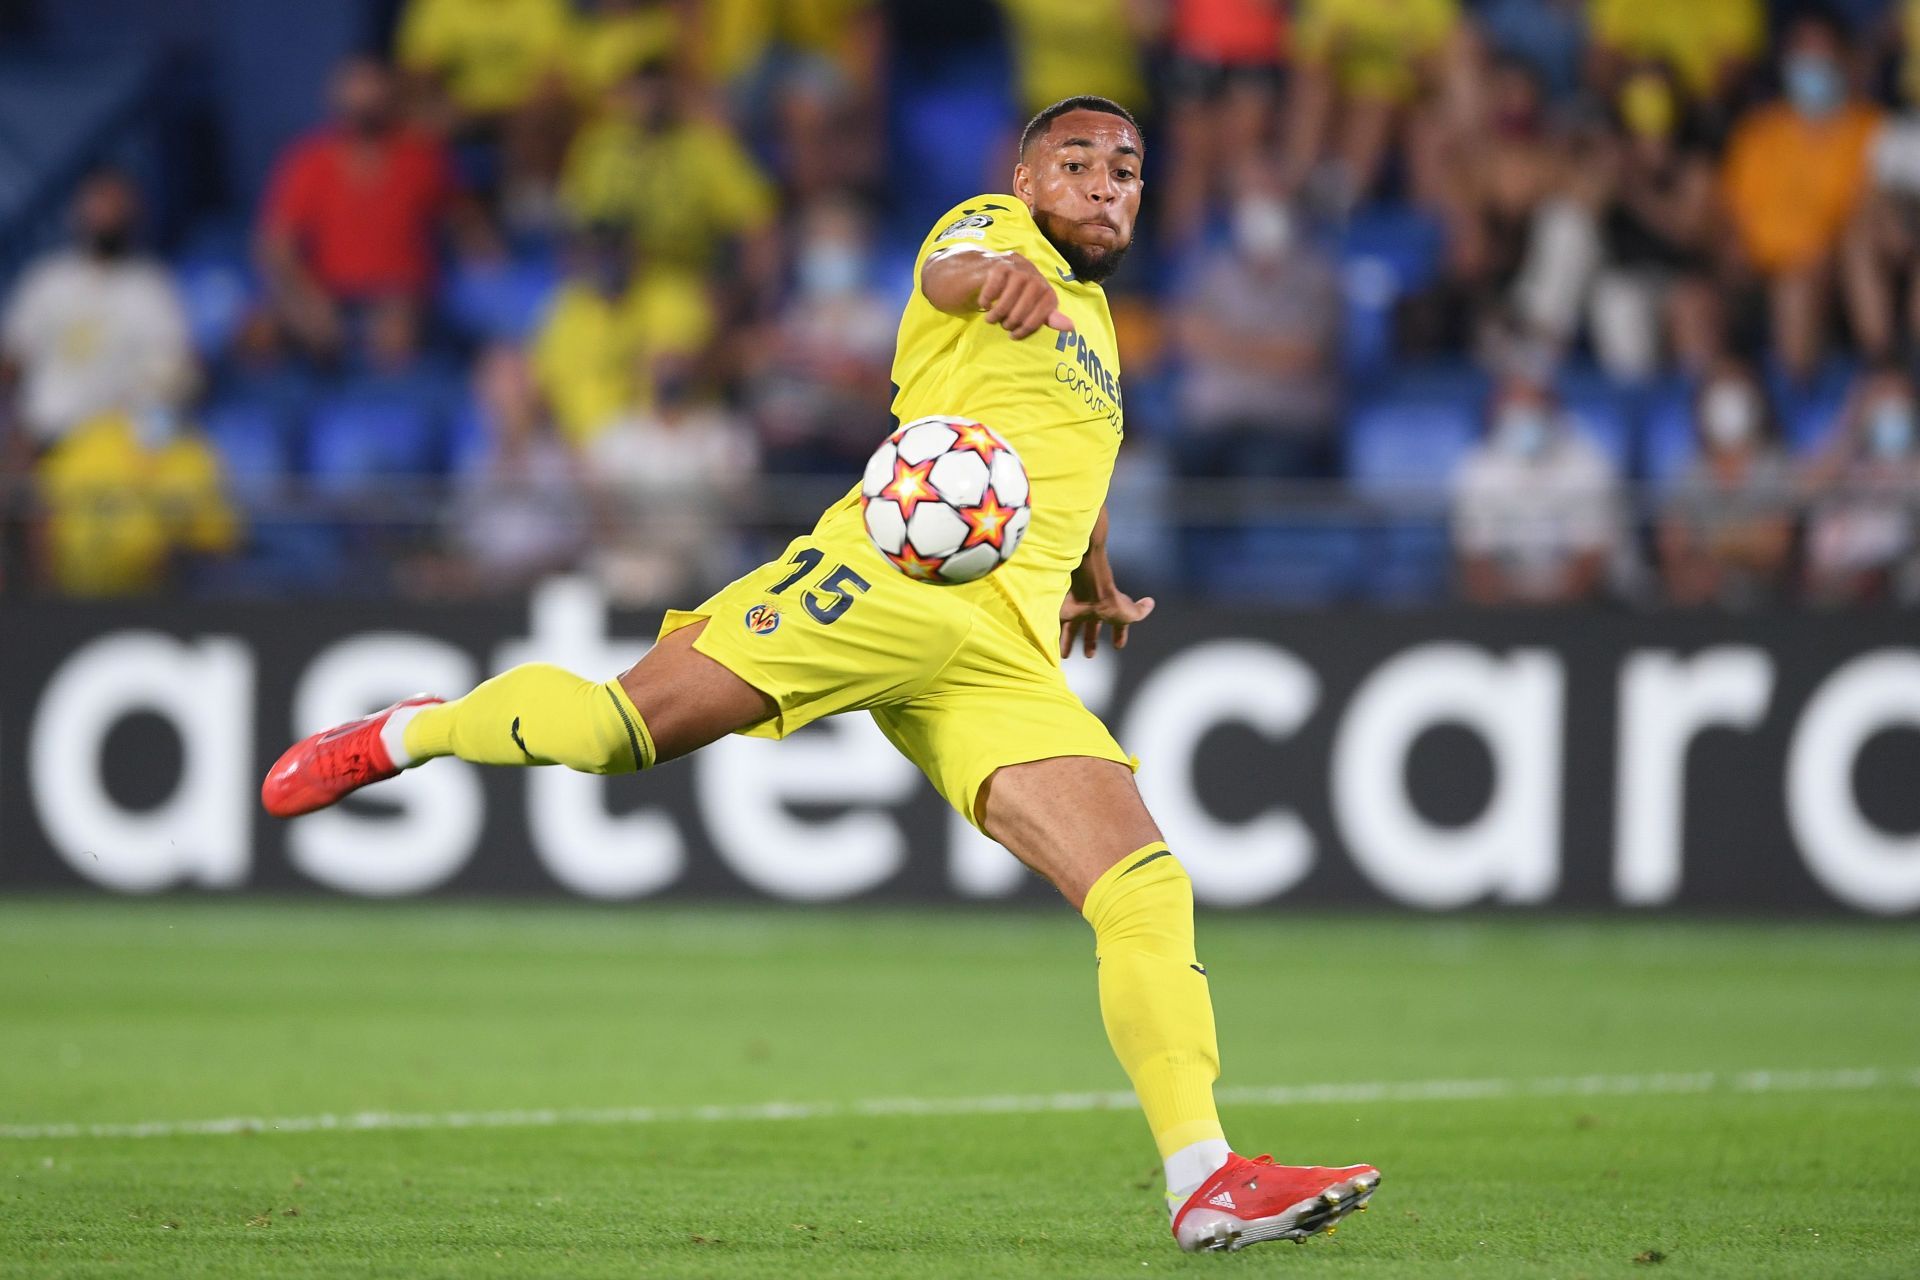 Villarreal winger Danjuma is being linked with the Magpies